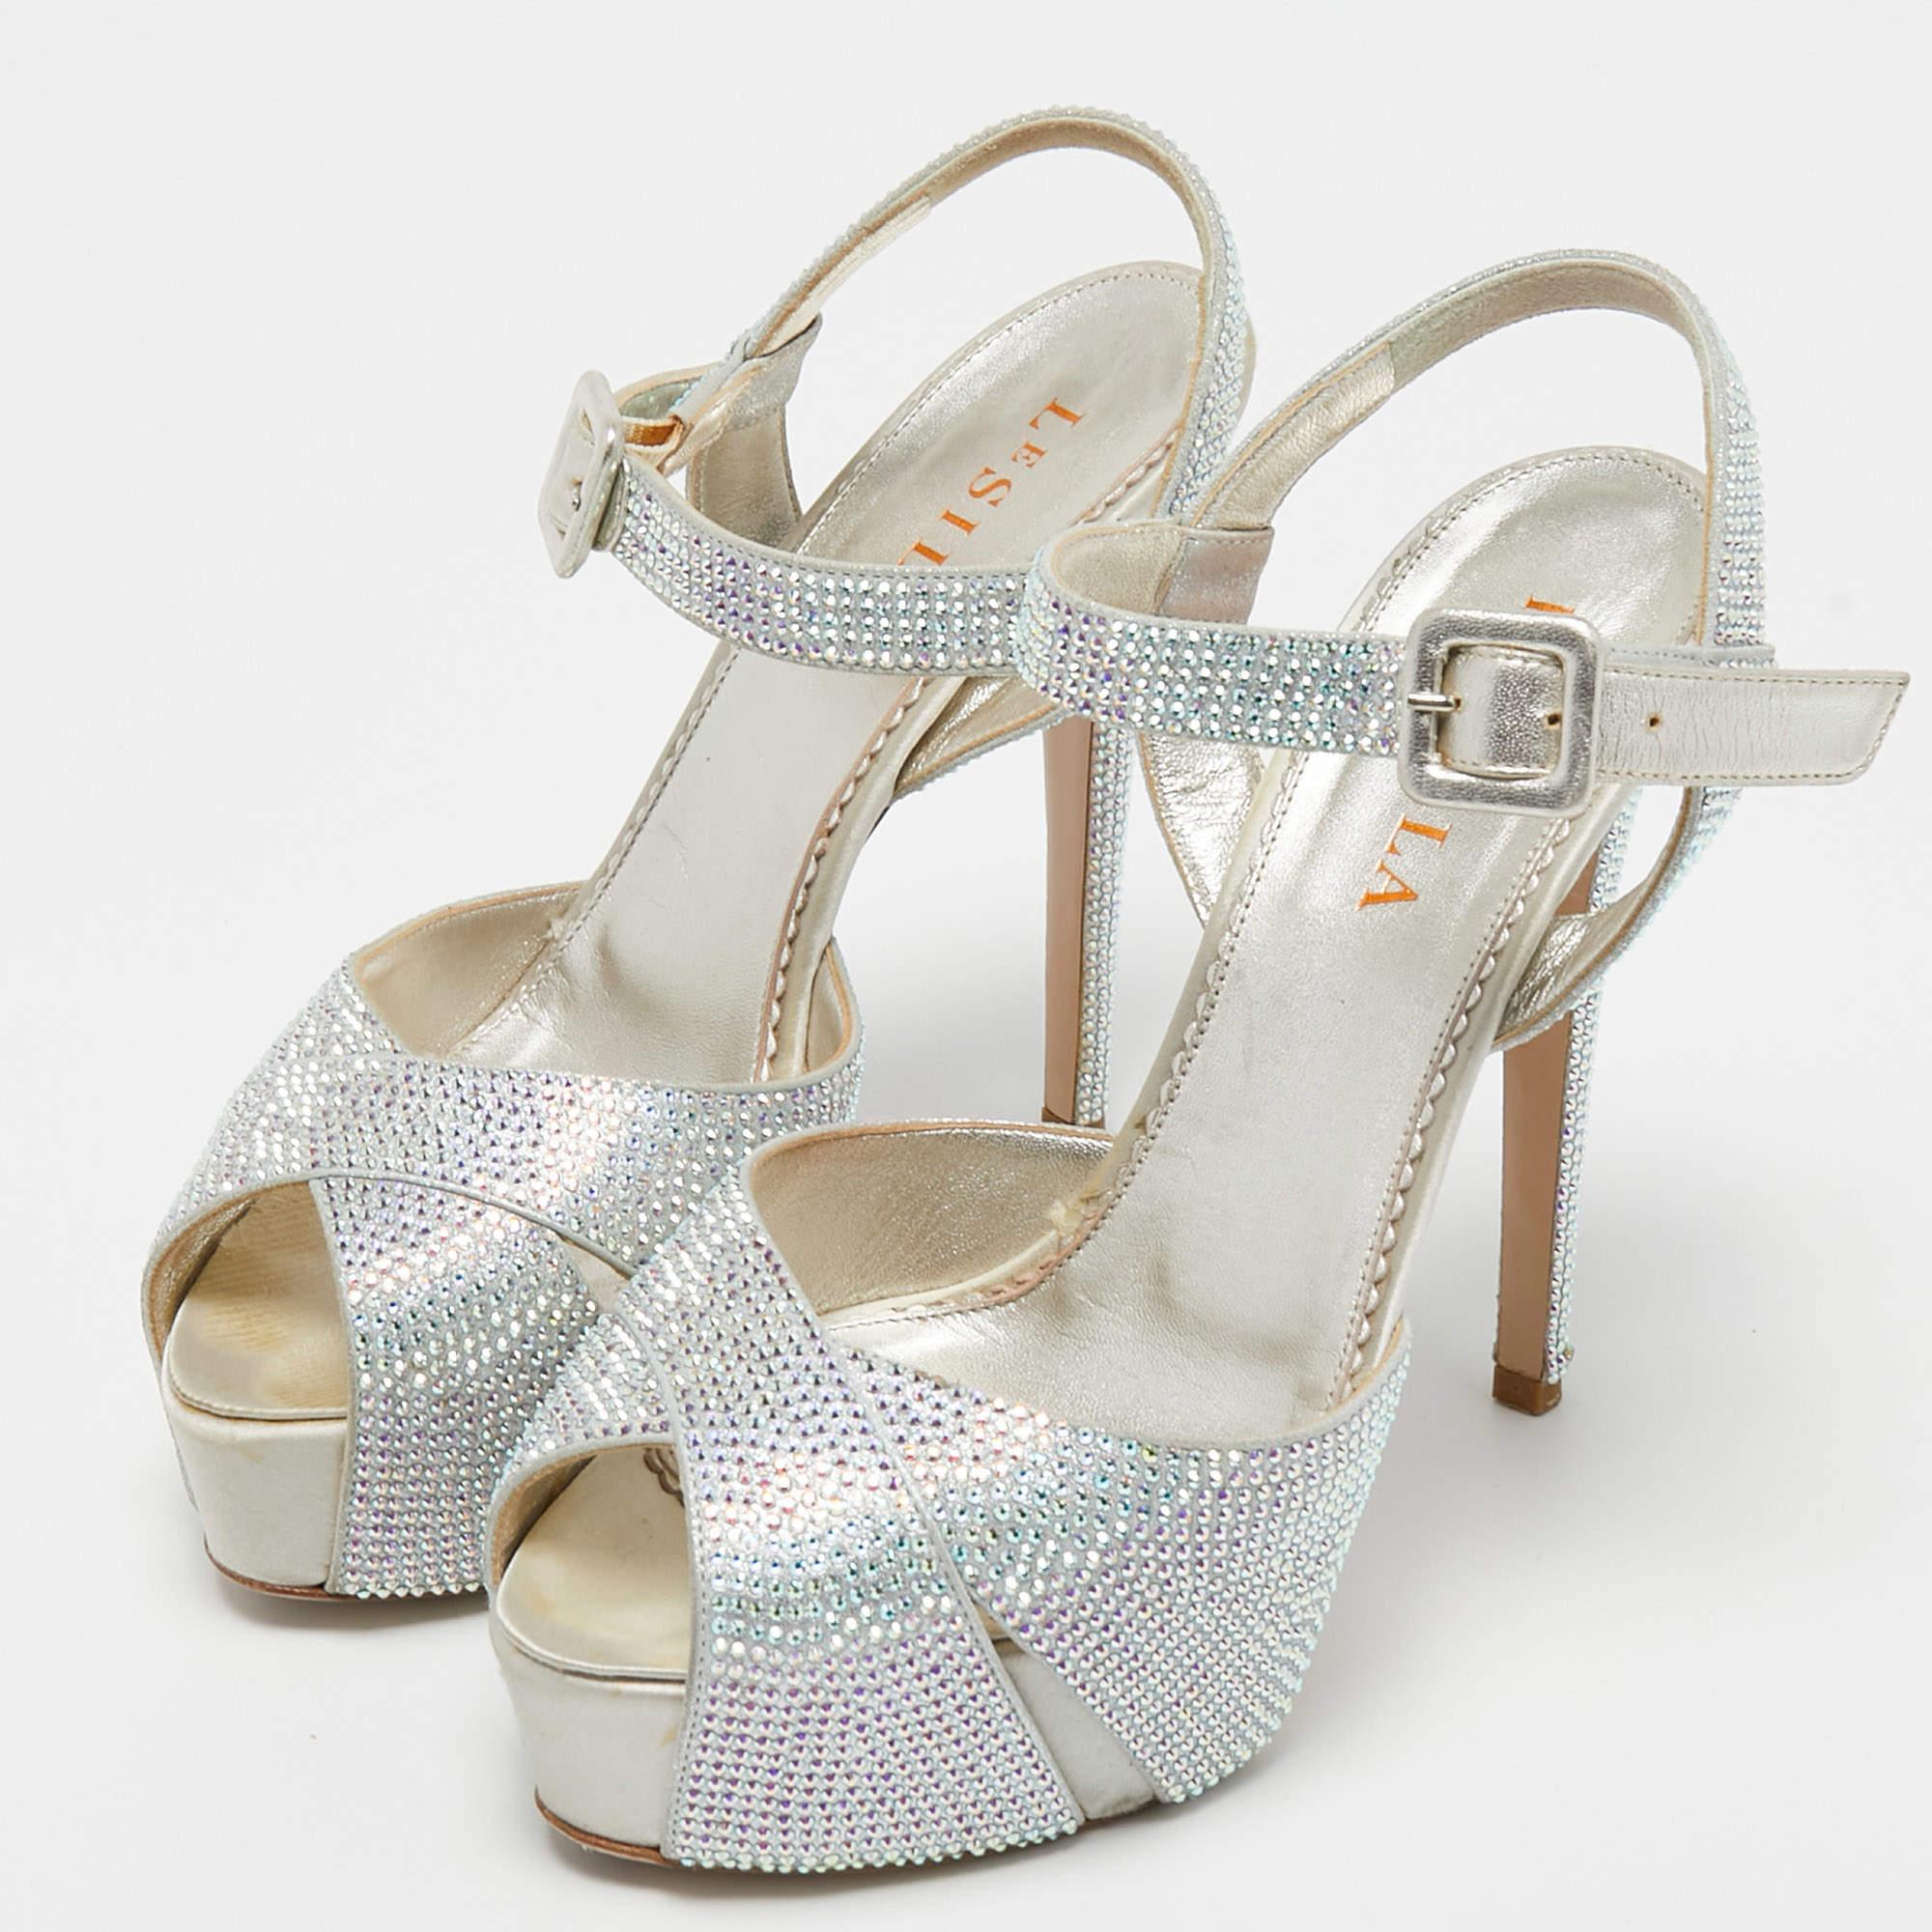 Le Silla Silver Crystal Embellished Cross Ankle Strap Platform Sandals Size 37 In Good Condition For Sale In Dubai, Al Qouz 2